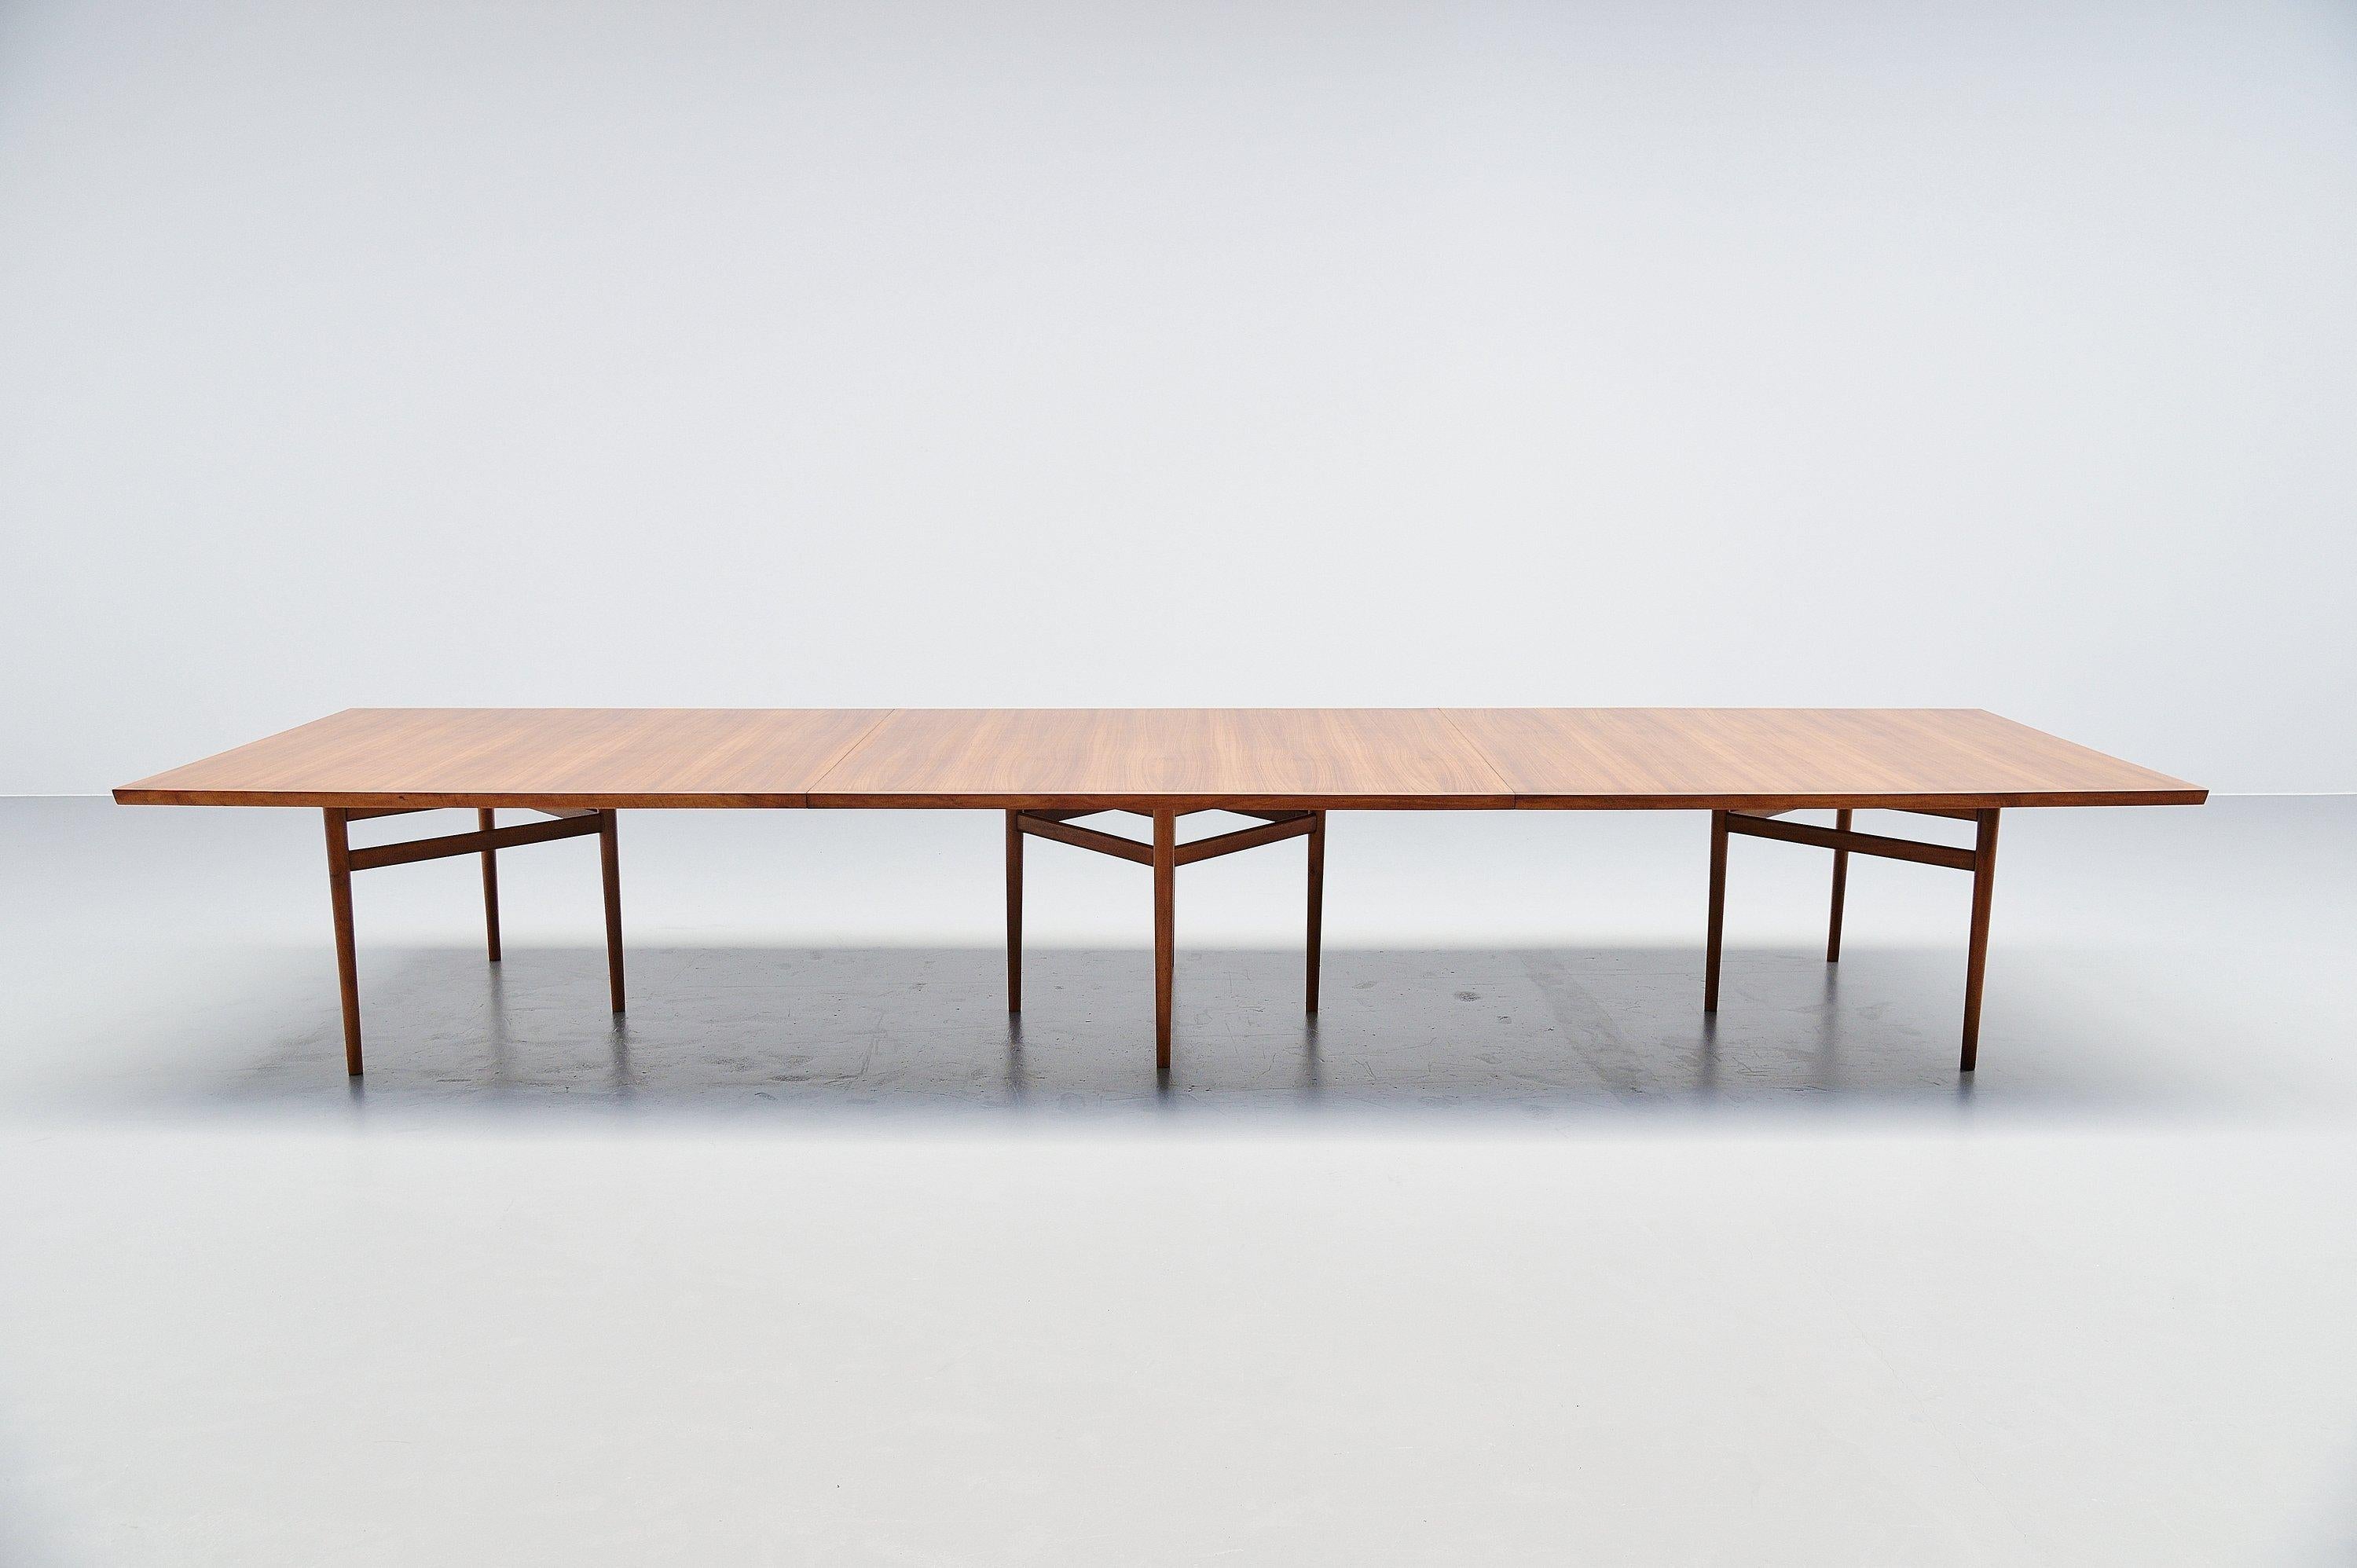 Monumental conference table model 201 designed by Arne Vodder and manufactured by Sibast Mobler, Denmark 1960. The table is made in teak wood, is fully restored and looks great again. Only 1 leg is a little bit bent, since this is solide wood we